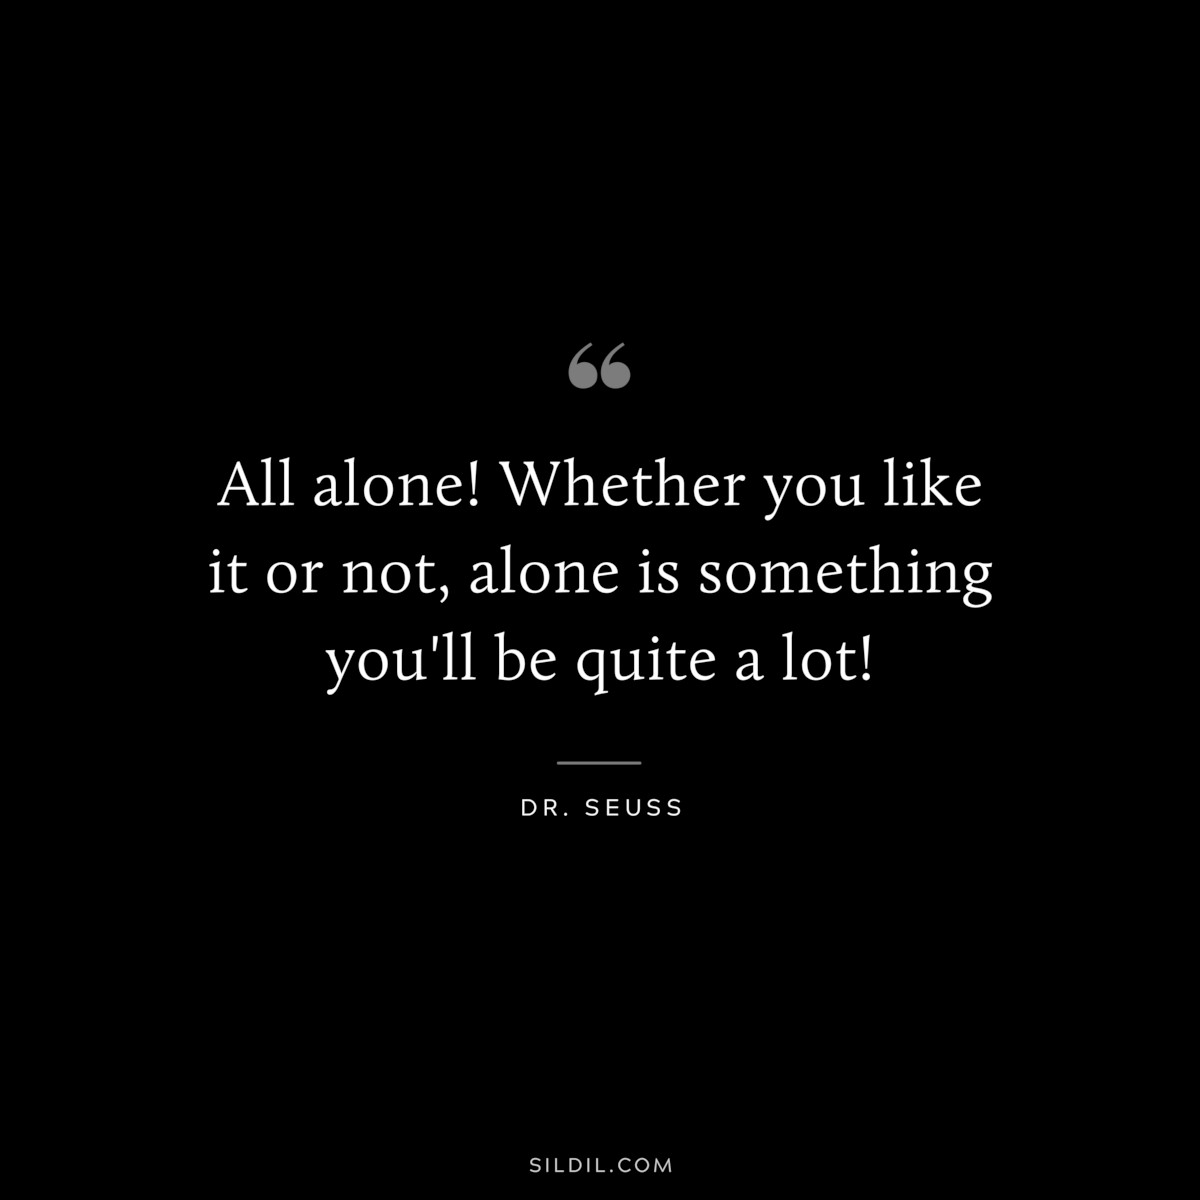 All alone! Whether you like it or not, alone is something you'll be quite a lot! ― Dr. Seuss